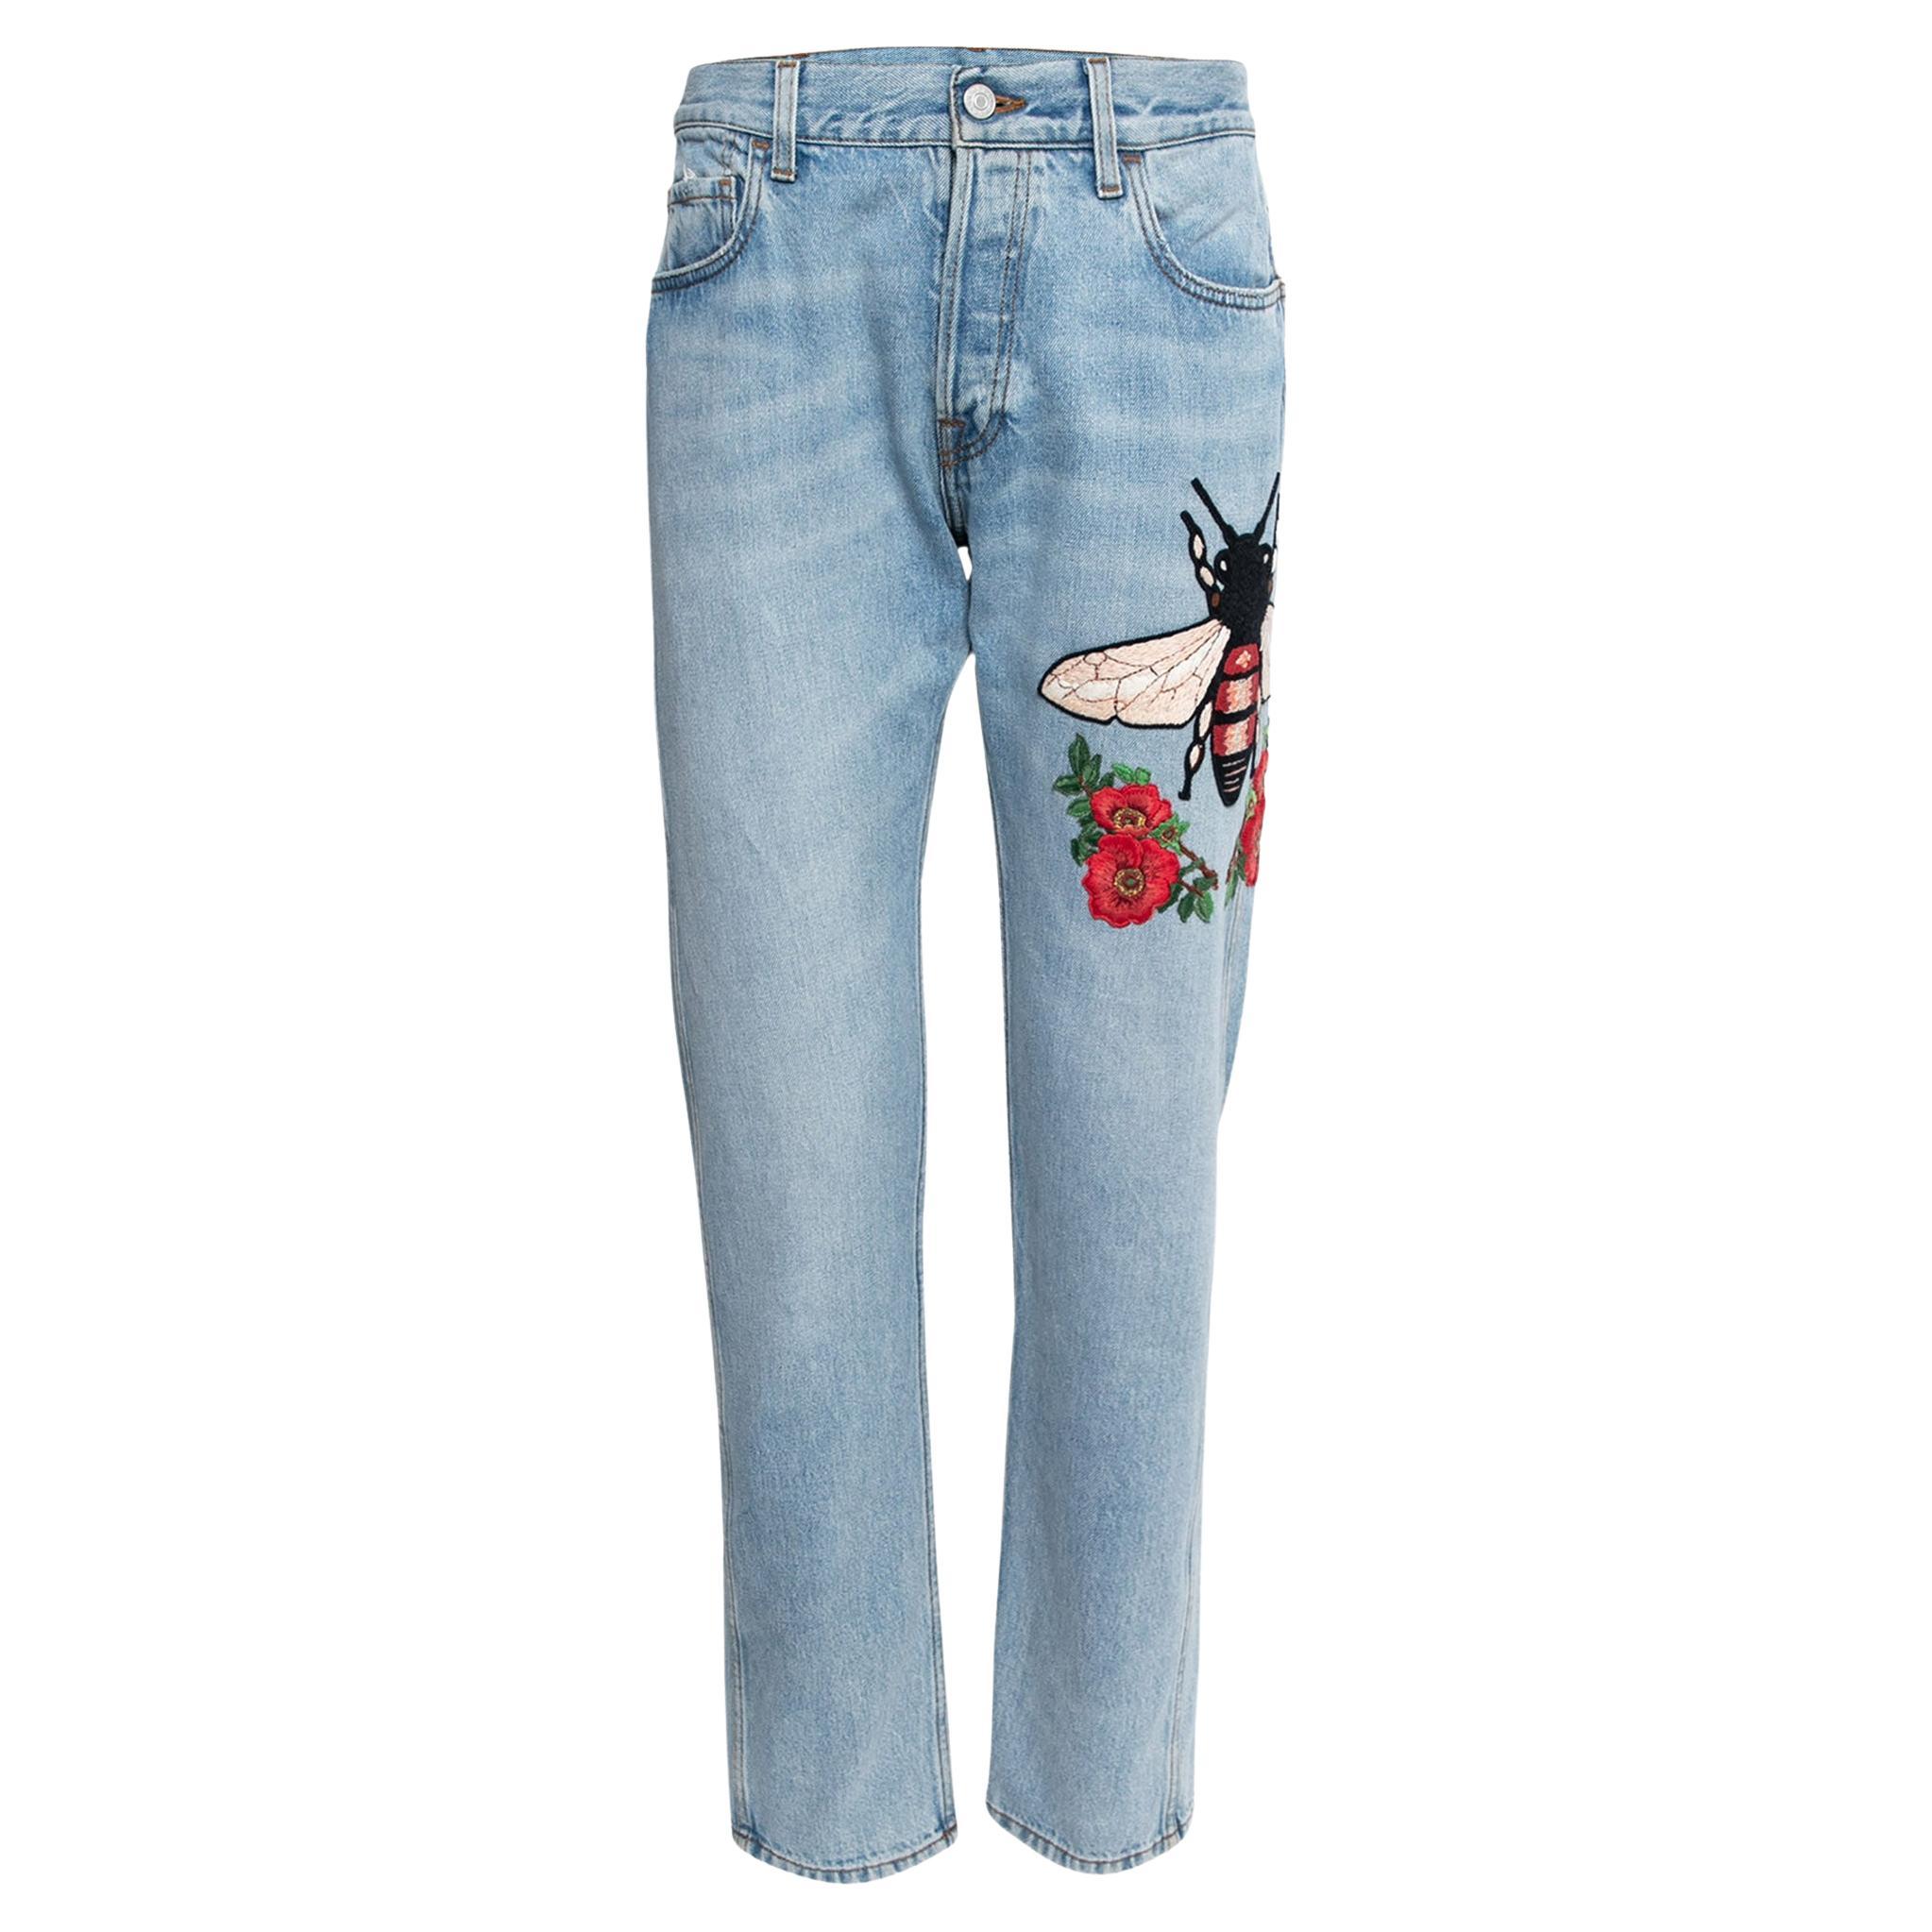 Gucci Floral Jeans - 6 For Sale on 1stDibs | gucci floral painted jeans, gucci  jeans flowers, gucci flower jeans